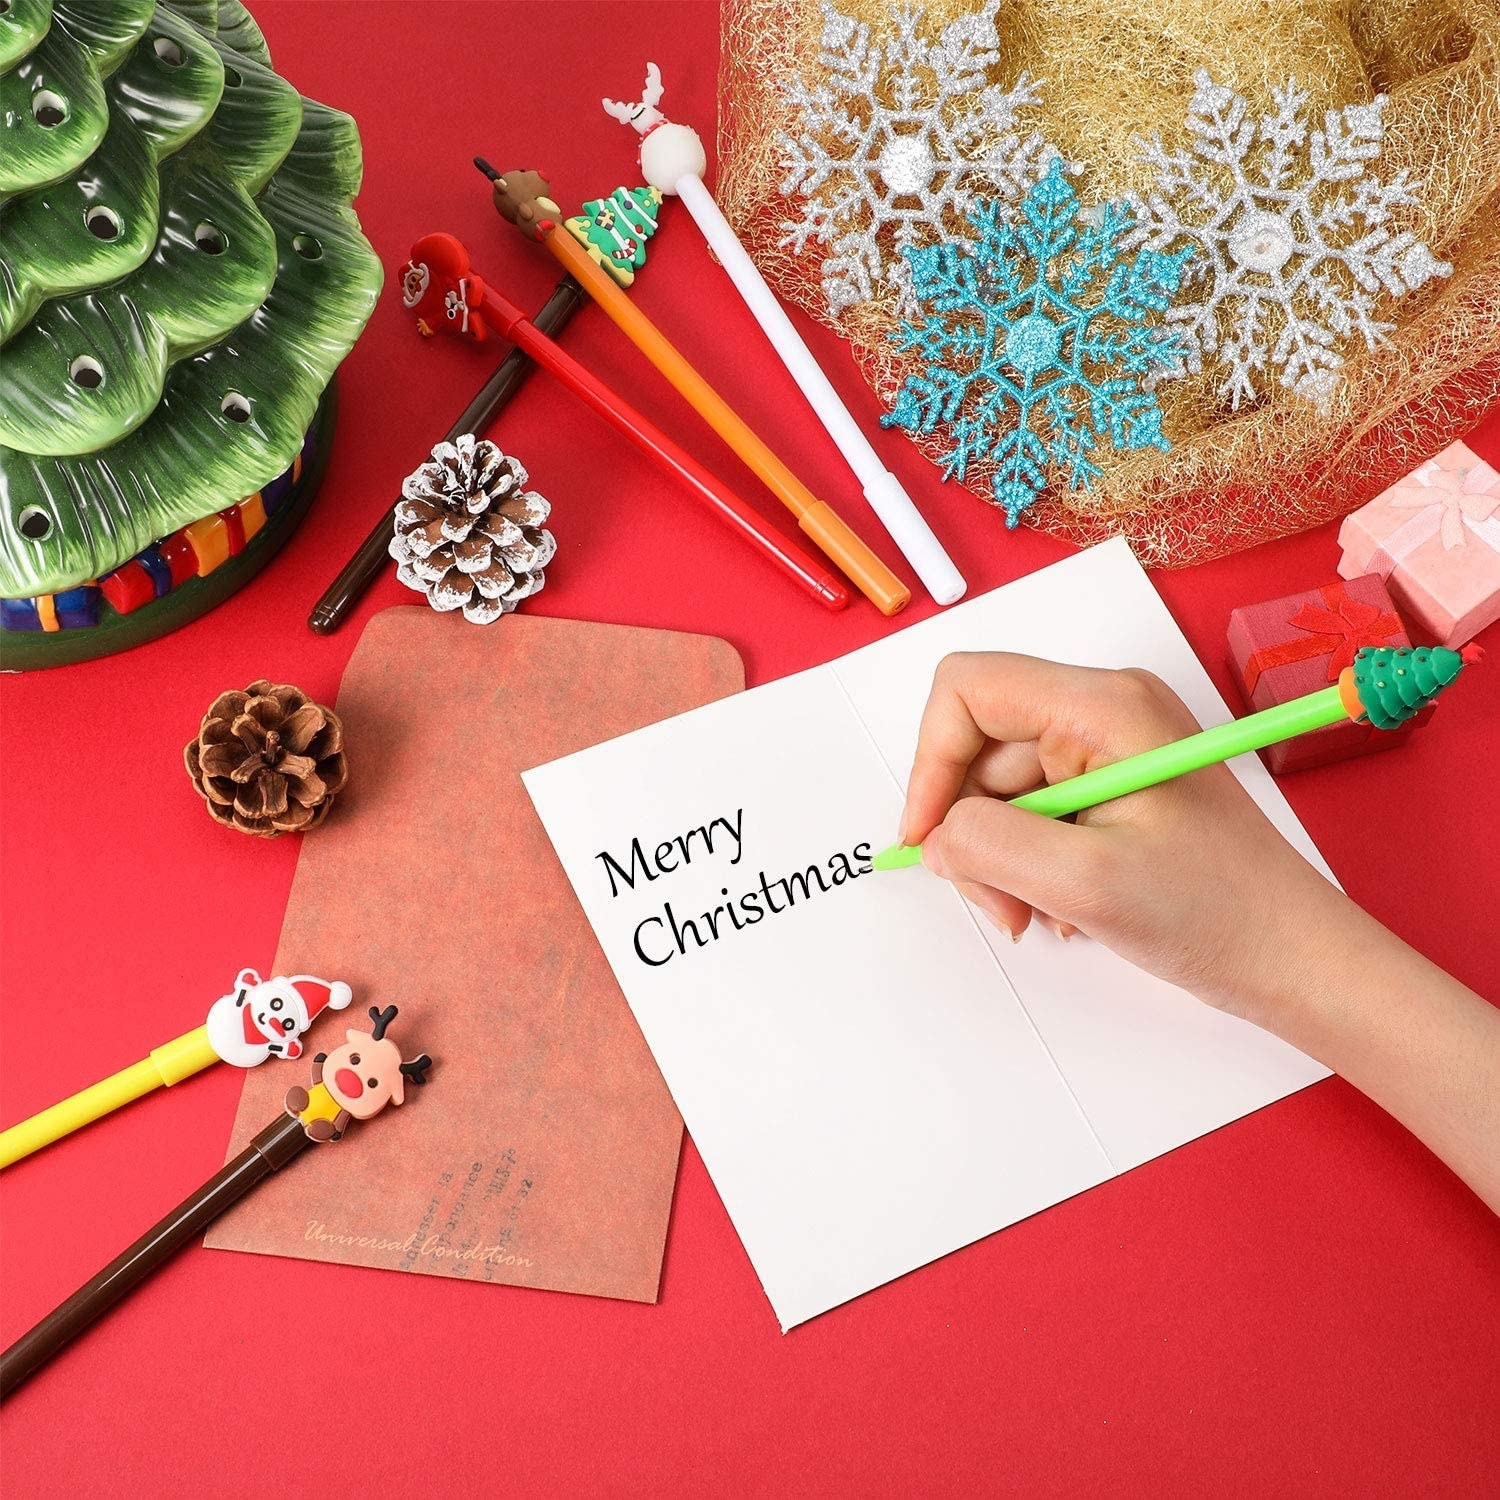 pens with toppers shaped like christmas trees, santas, and reindeer